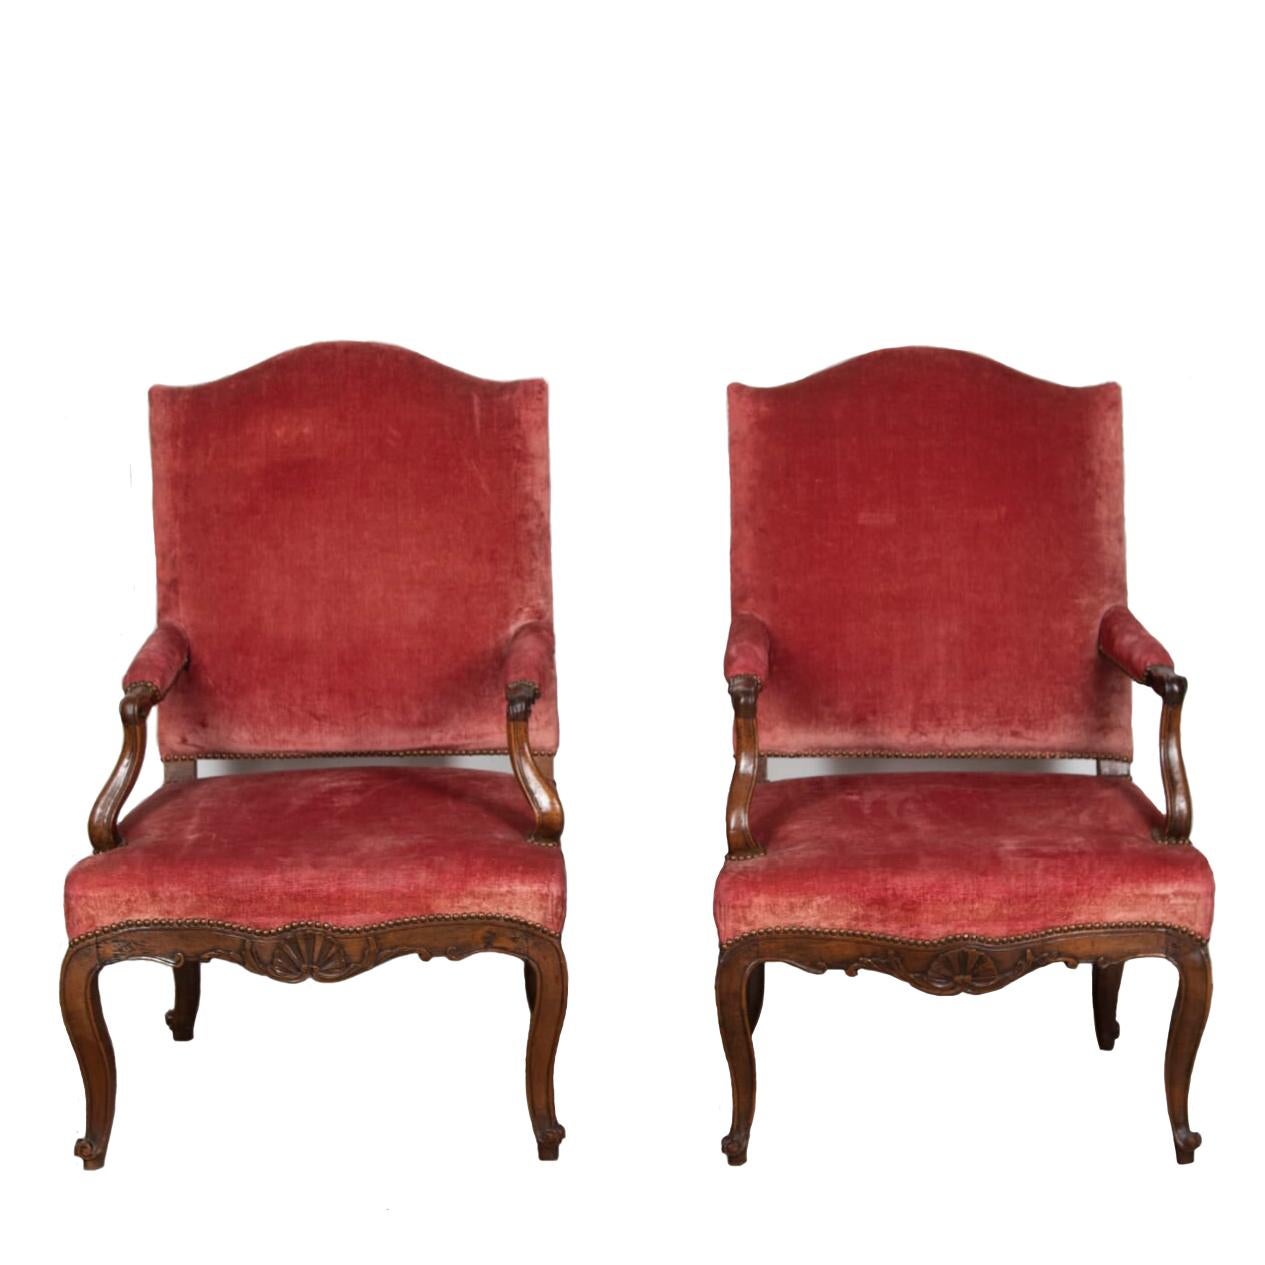 Large pair of mid 18th Century Louis XV walnut open armchairs.

Finely carved with shell motifs and leaf decoration to the front apron and further undulating side rails. The wide seat sits on shapely cabriole legs ending in beautifully carved